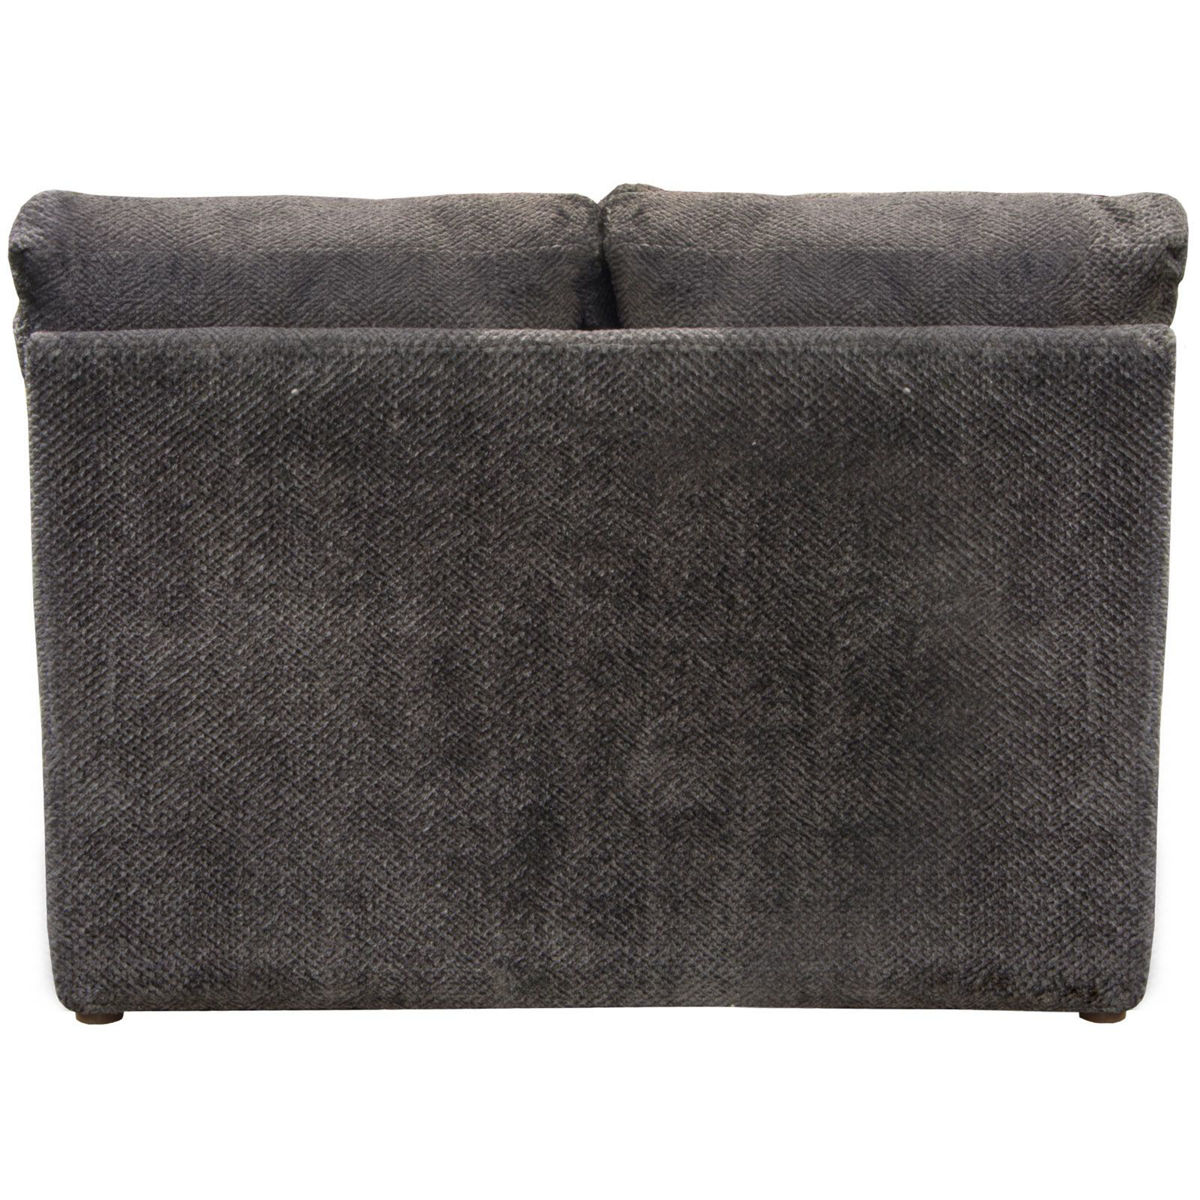 Picture of Mammoth Smoke Armless Loveseat